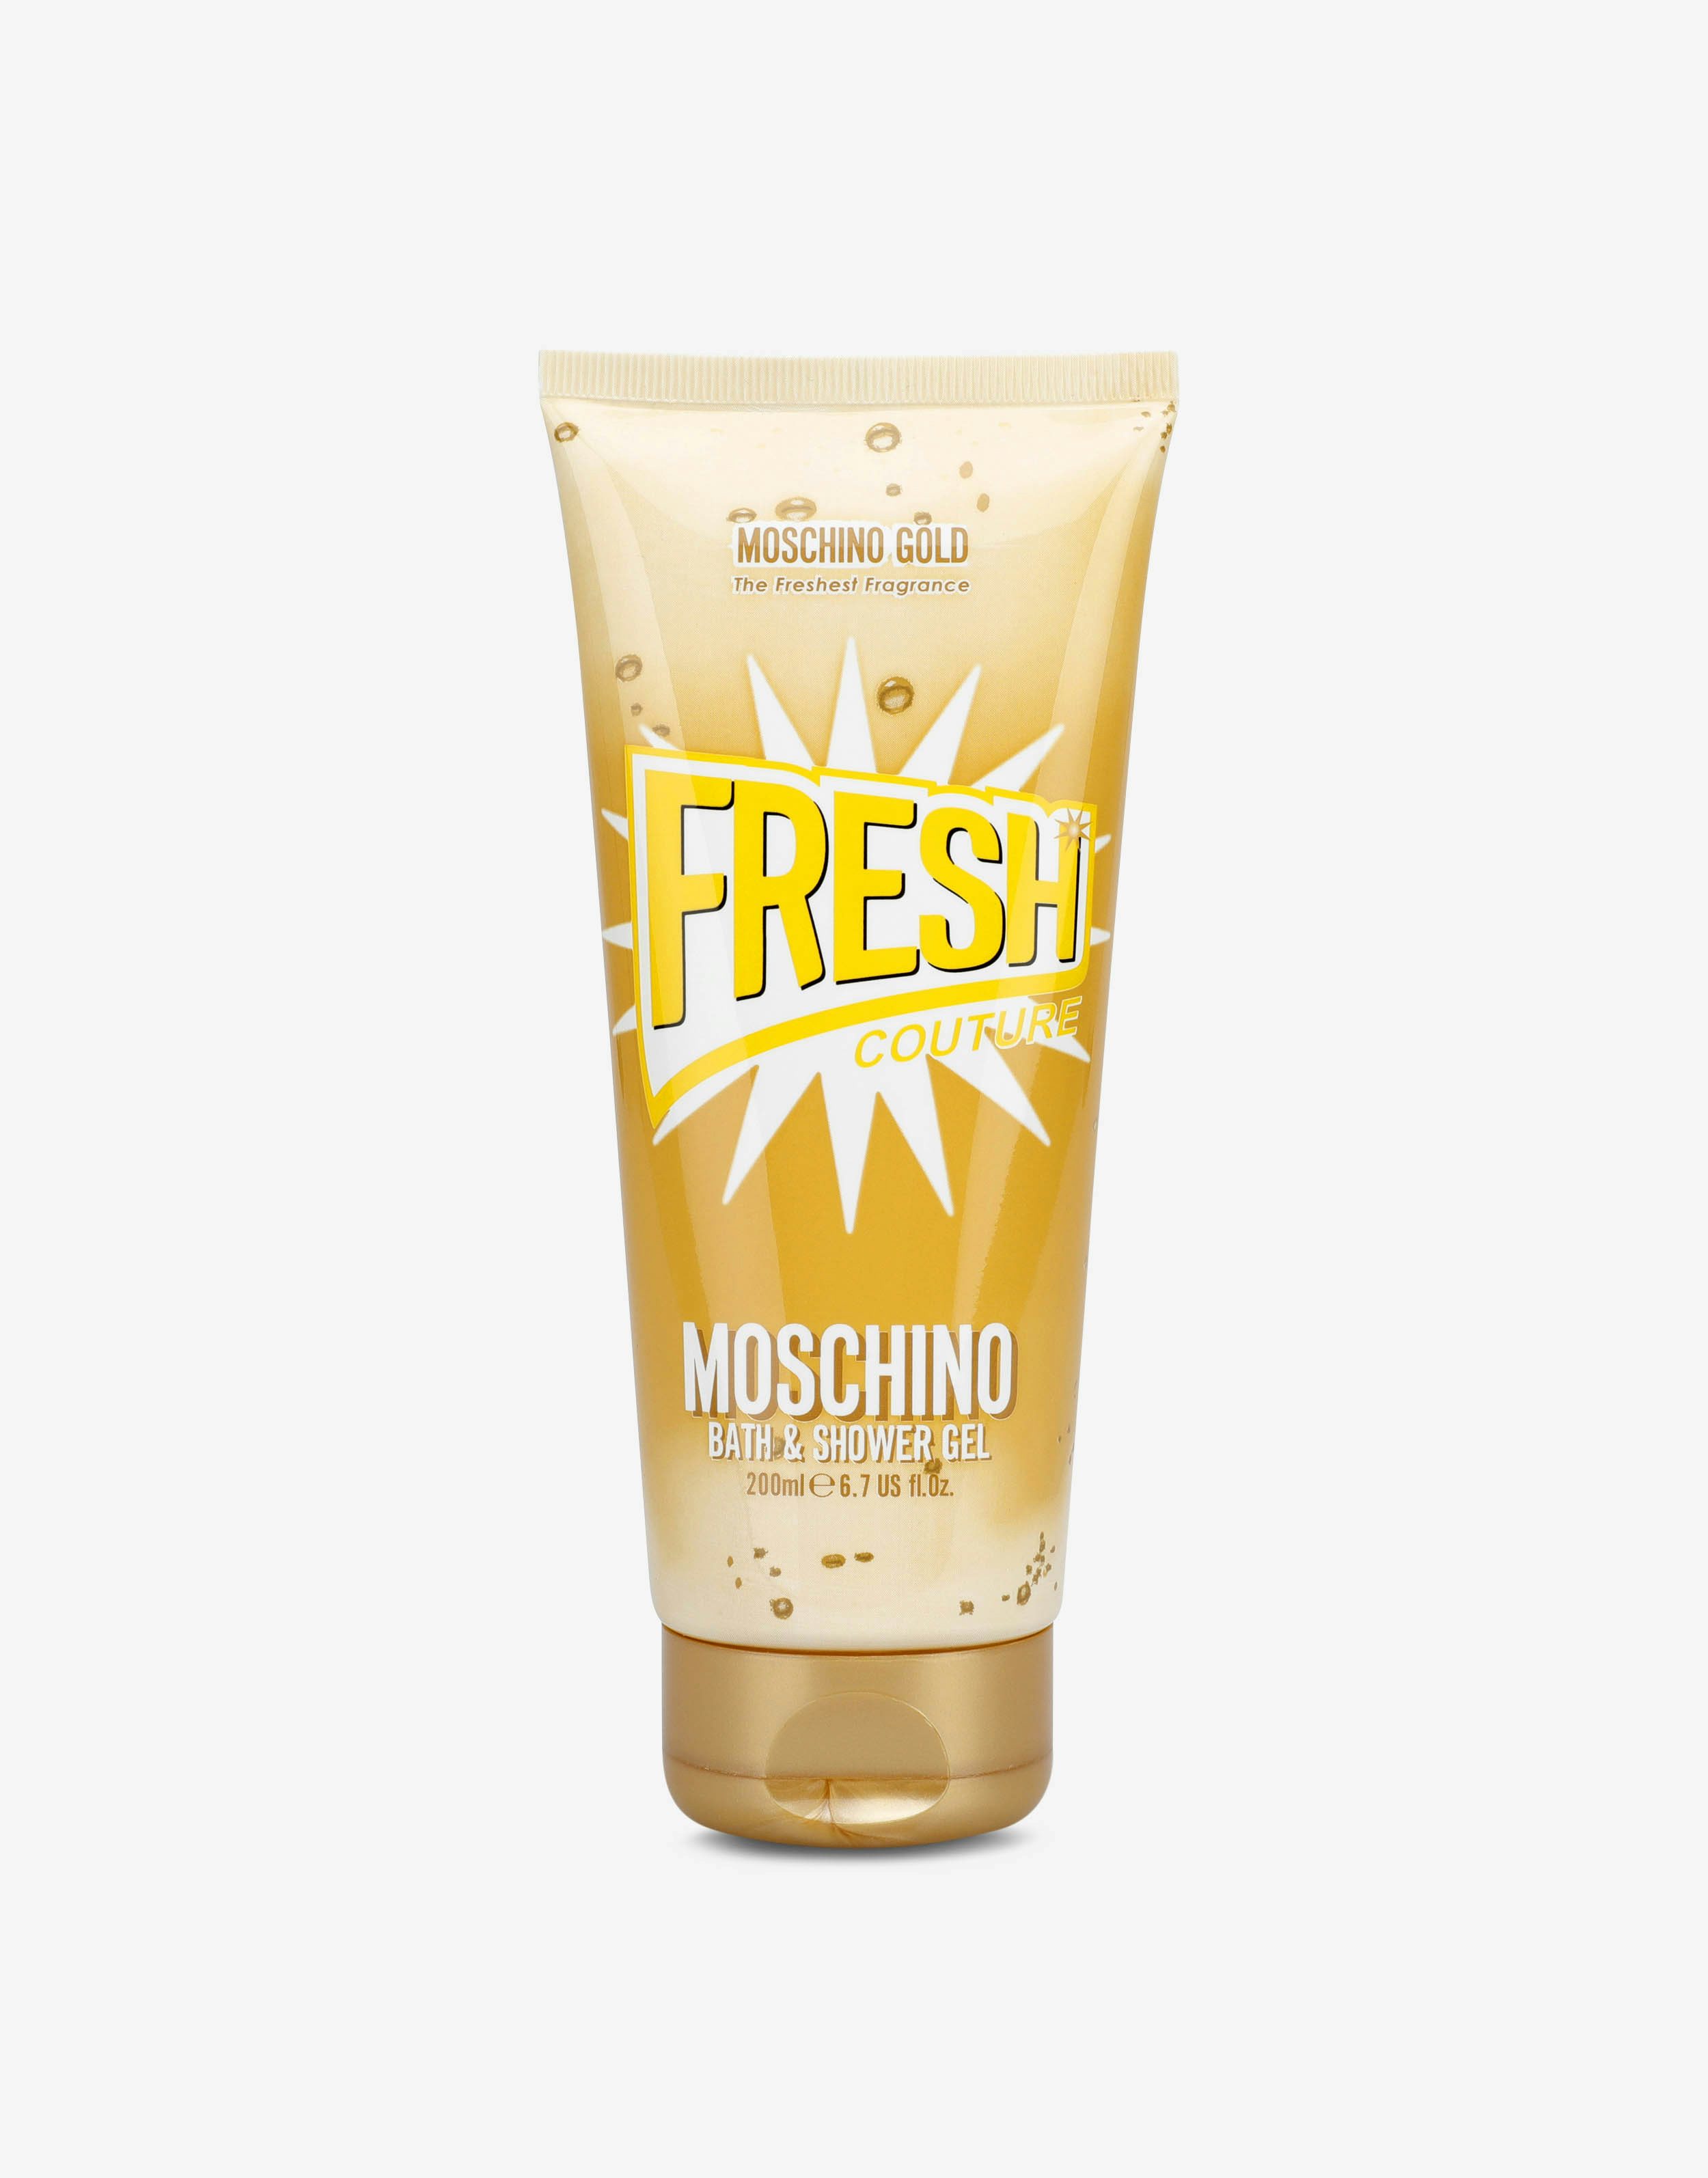 The Freshest Gold Fresh Couture shower gel